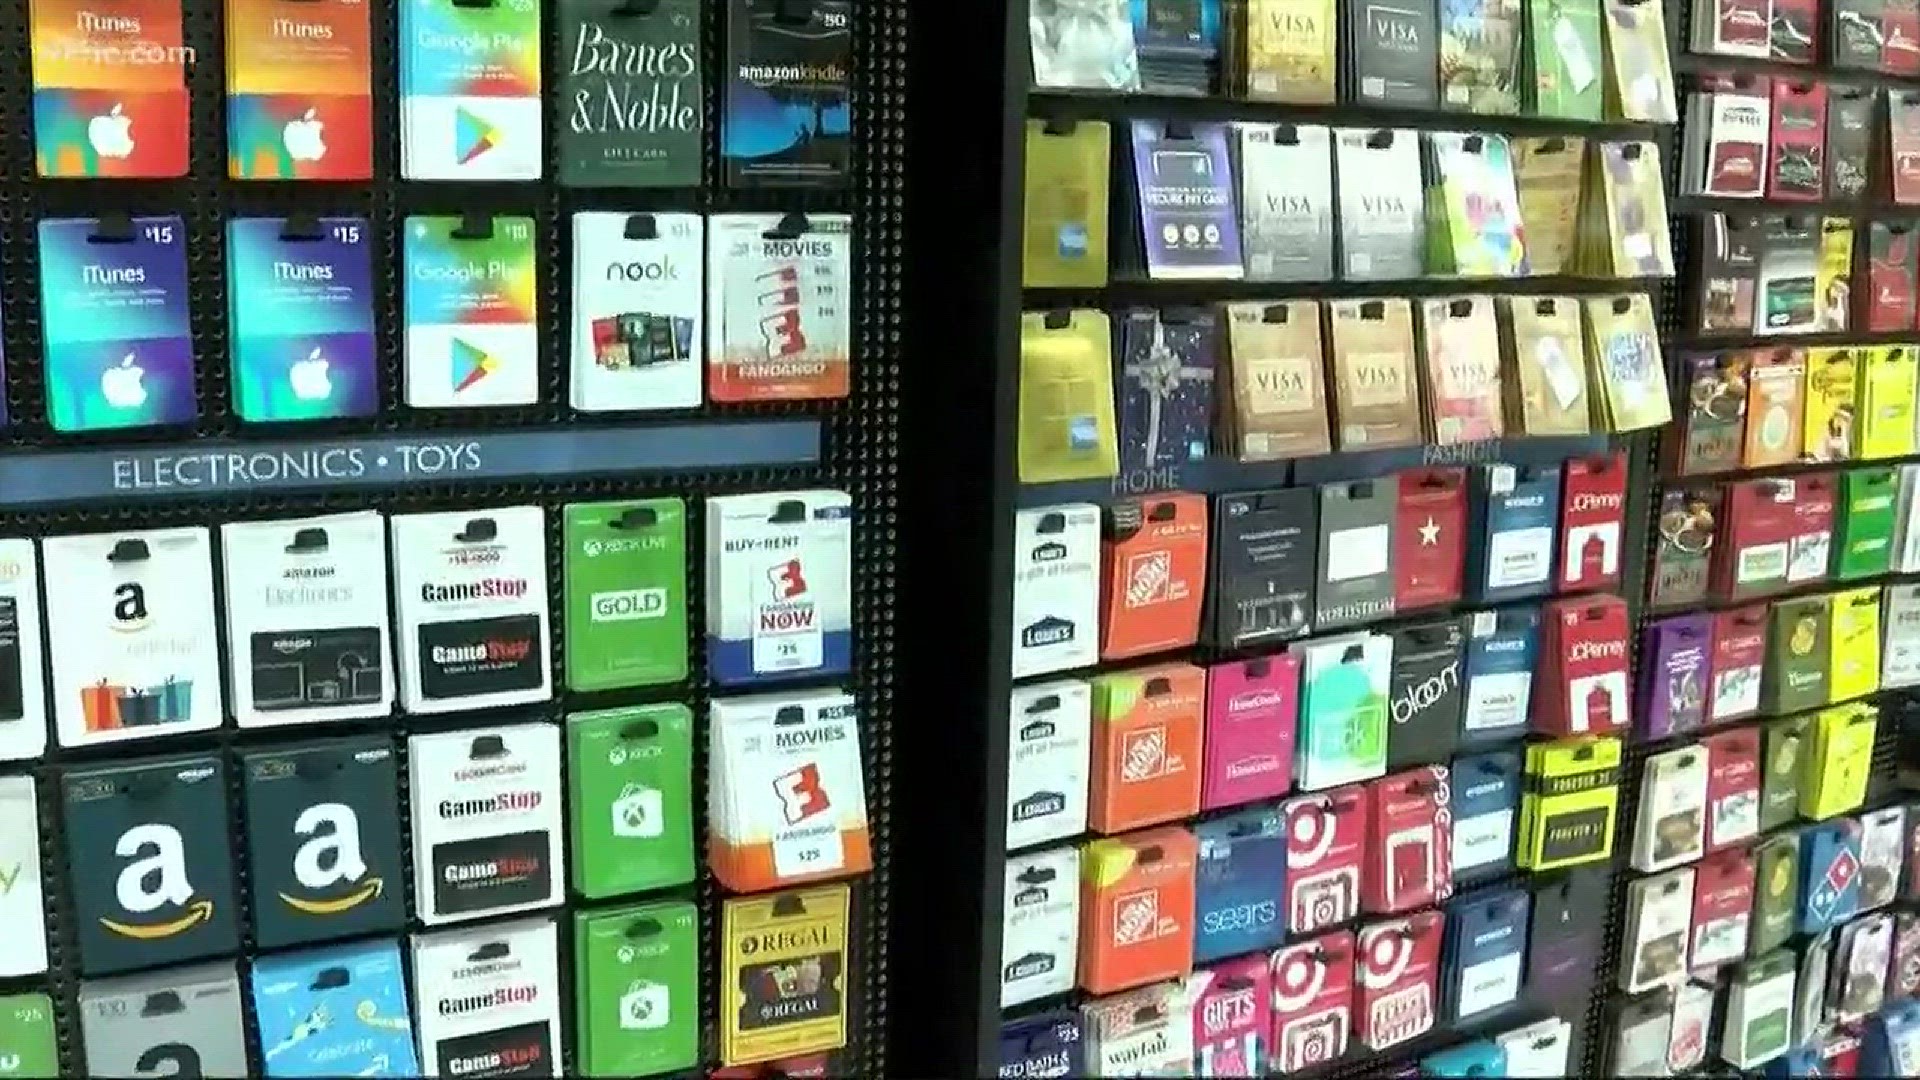 Where is the Best Place to Buy Gift Cards? | GCG